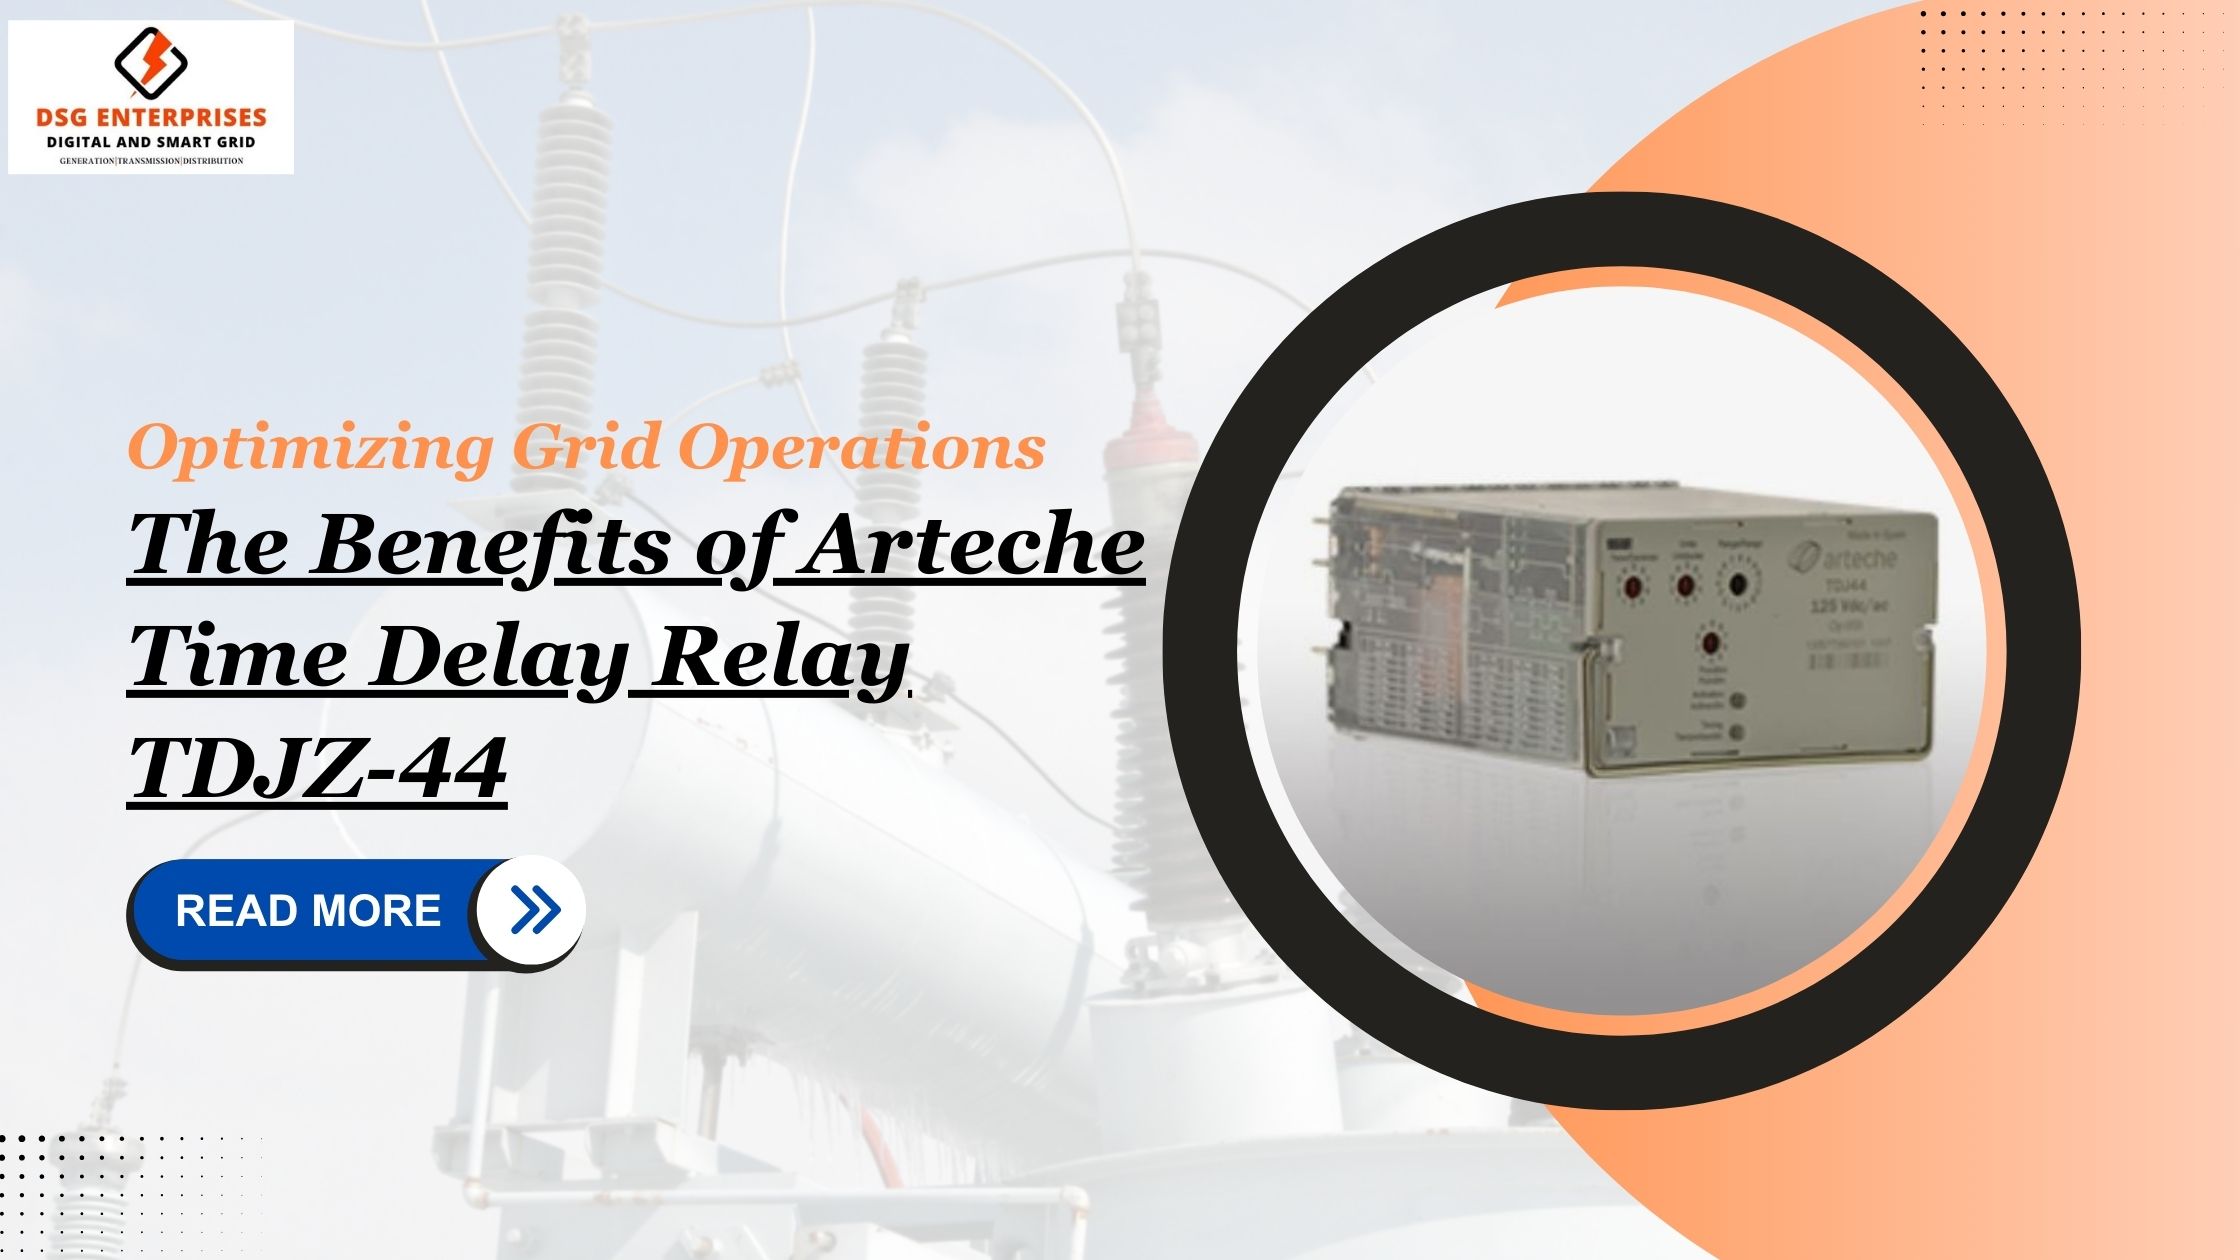 You are currently viewing Optimizing Grid Operations: The Benefits of Arteche Time Delay Relay TDJZ-44